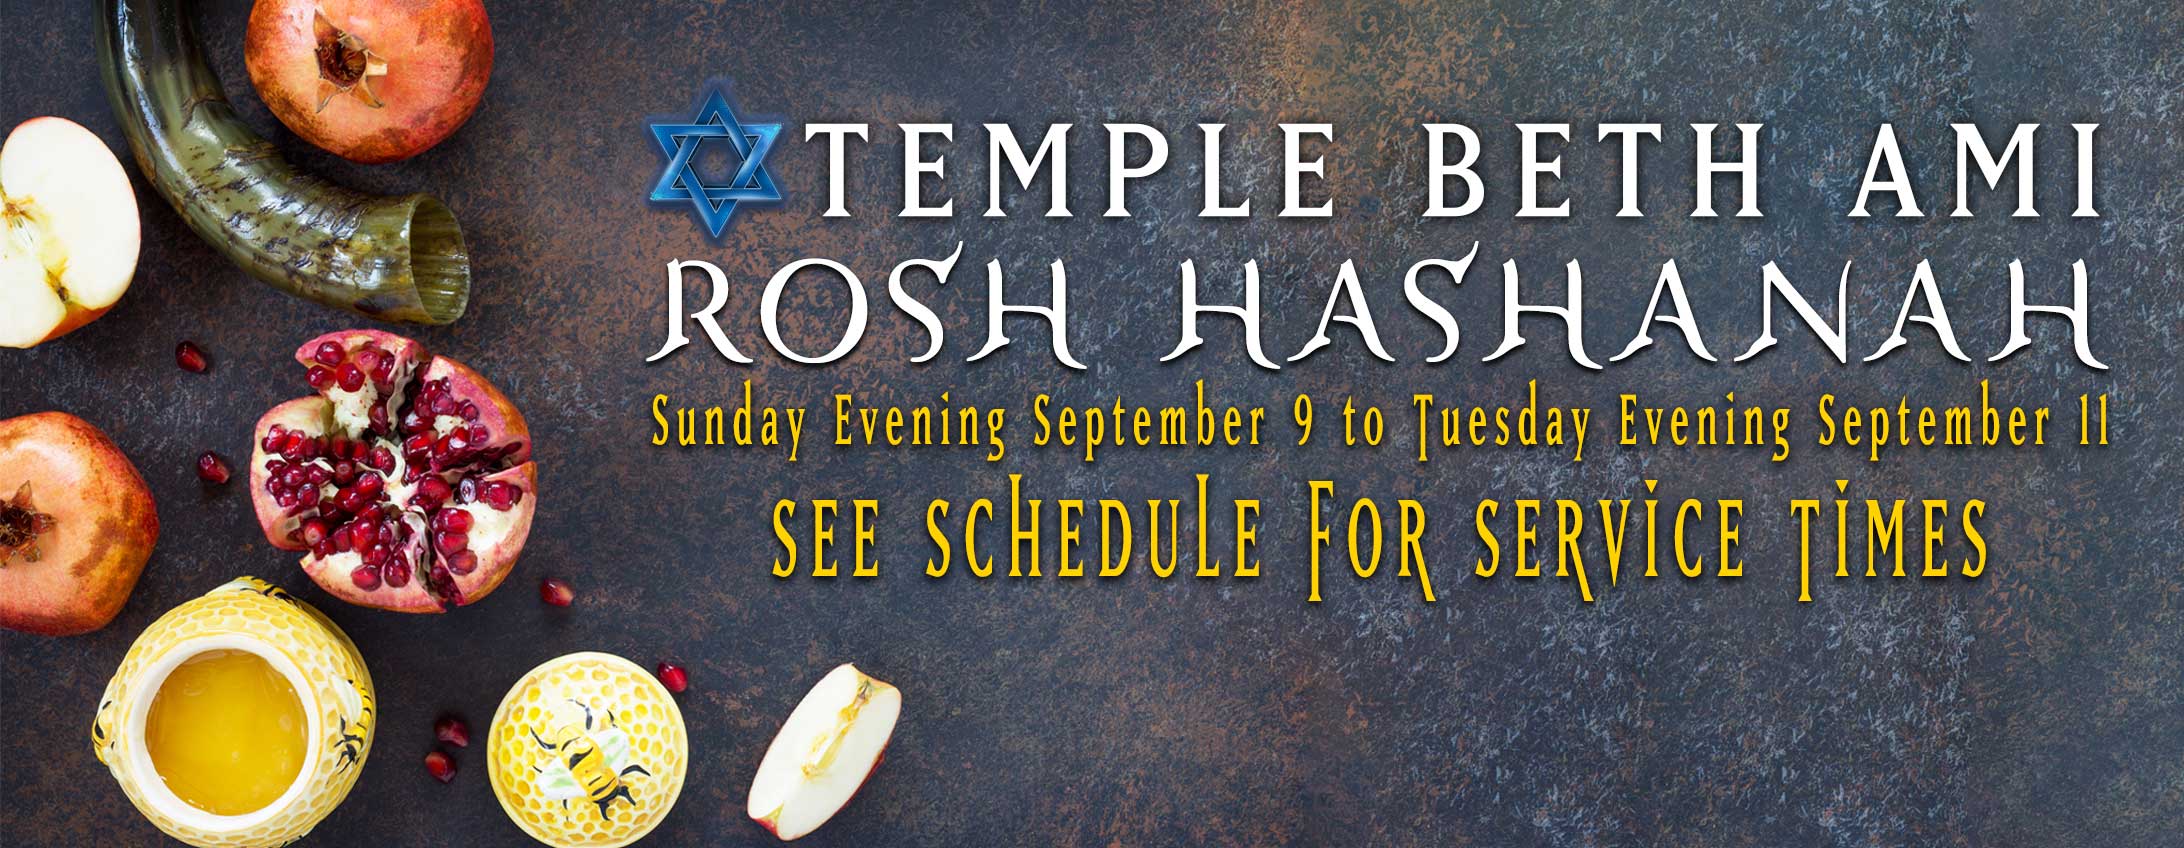 Philadelphia Conservative Synagogue Temple Beth Ami has regular events and non members may attend services